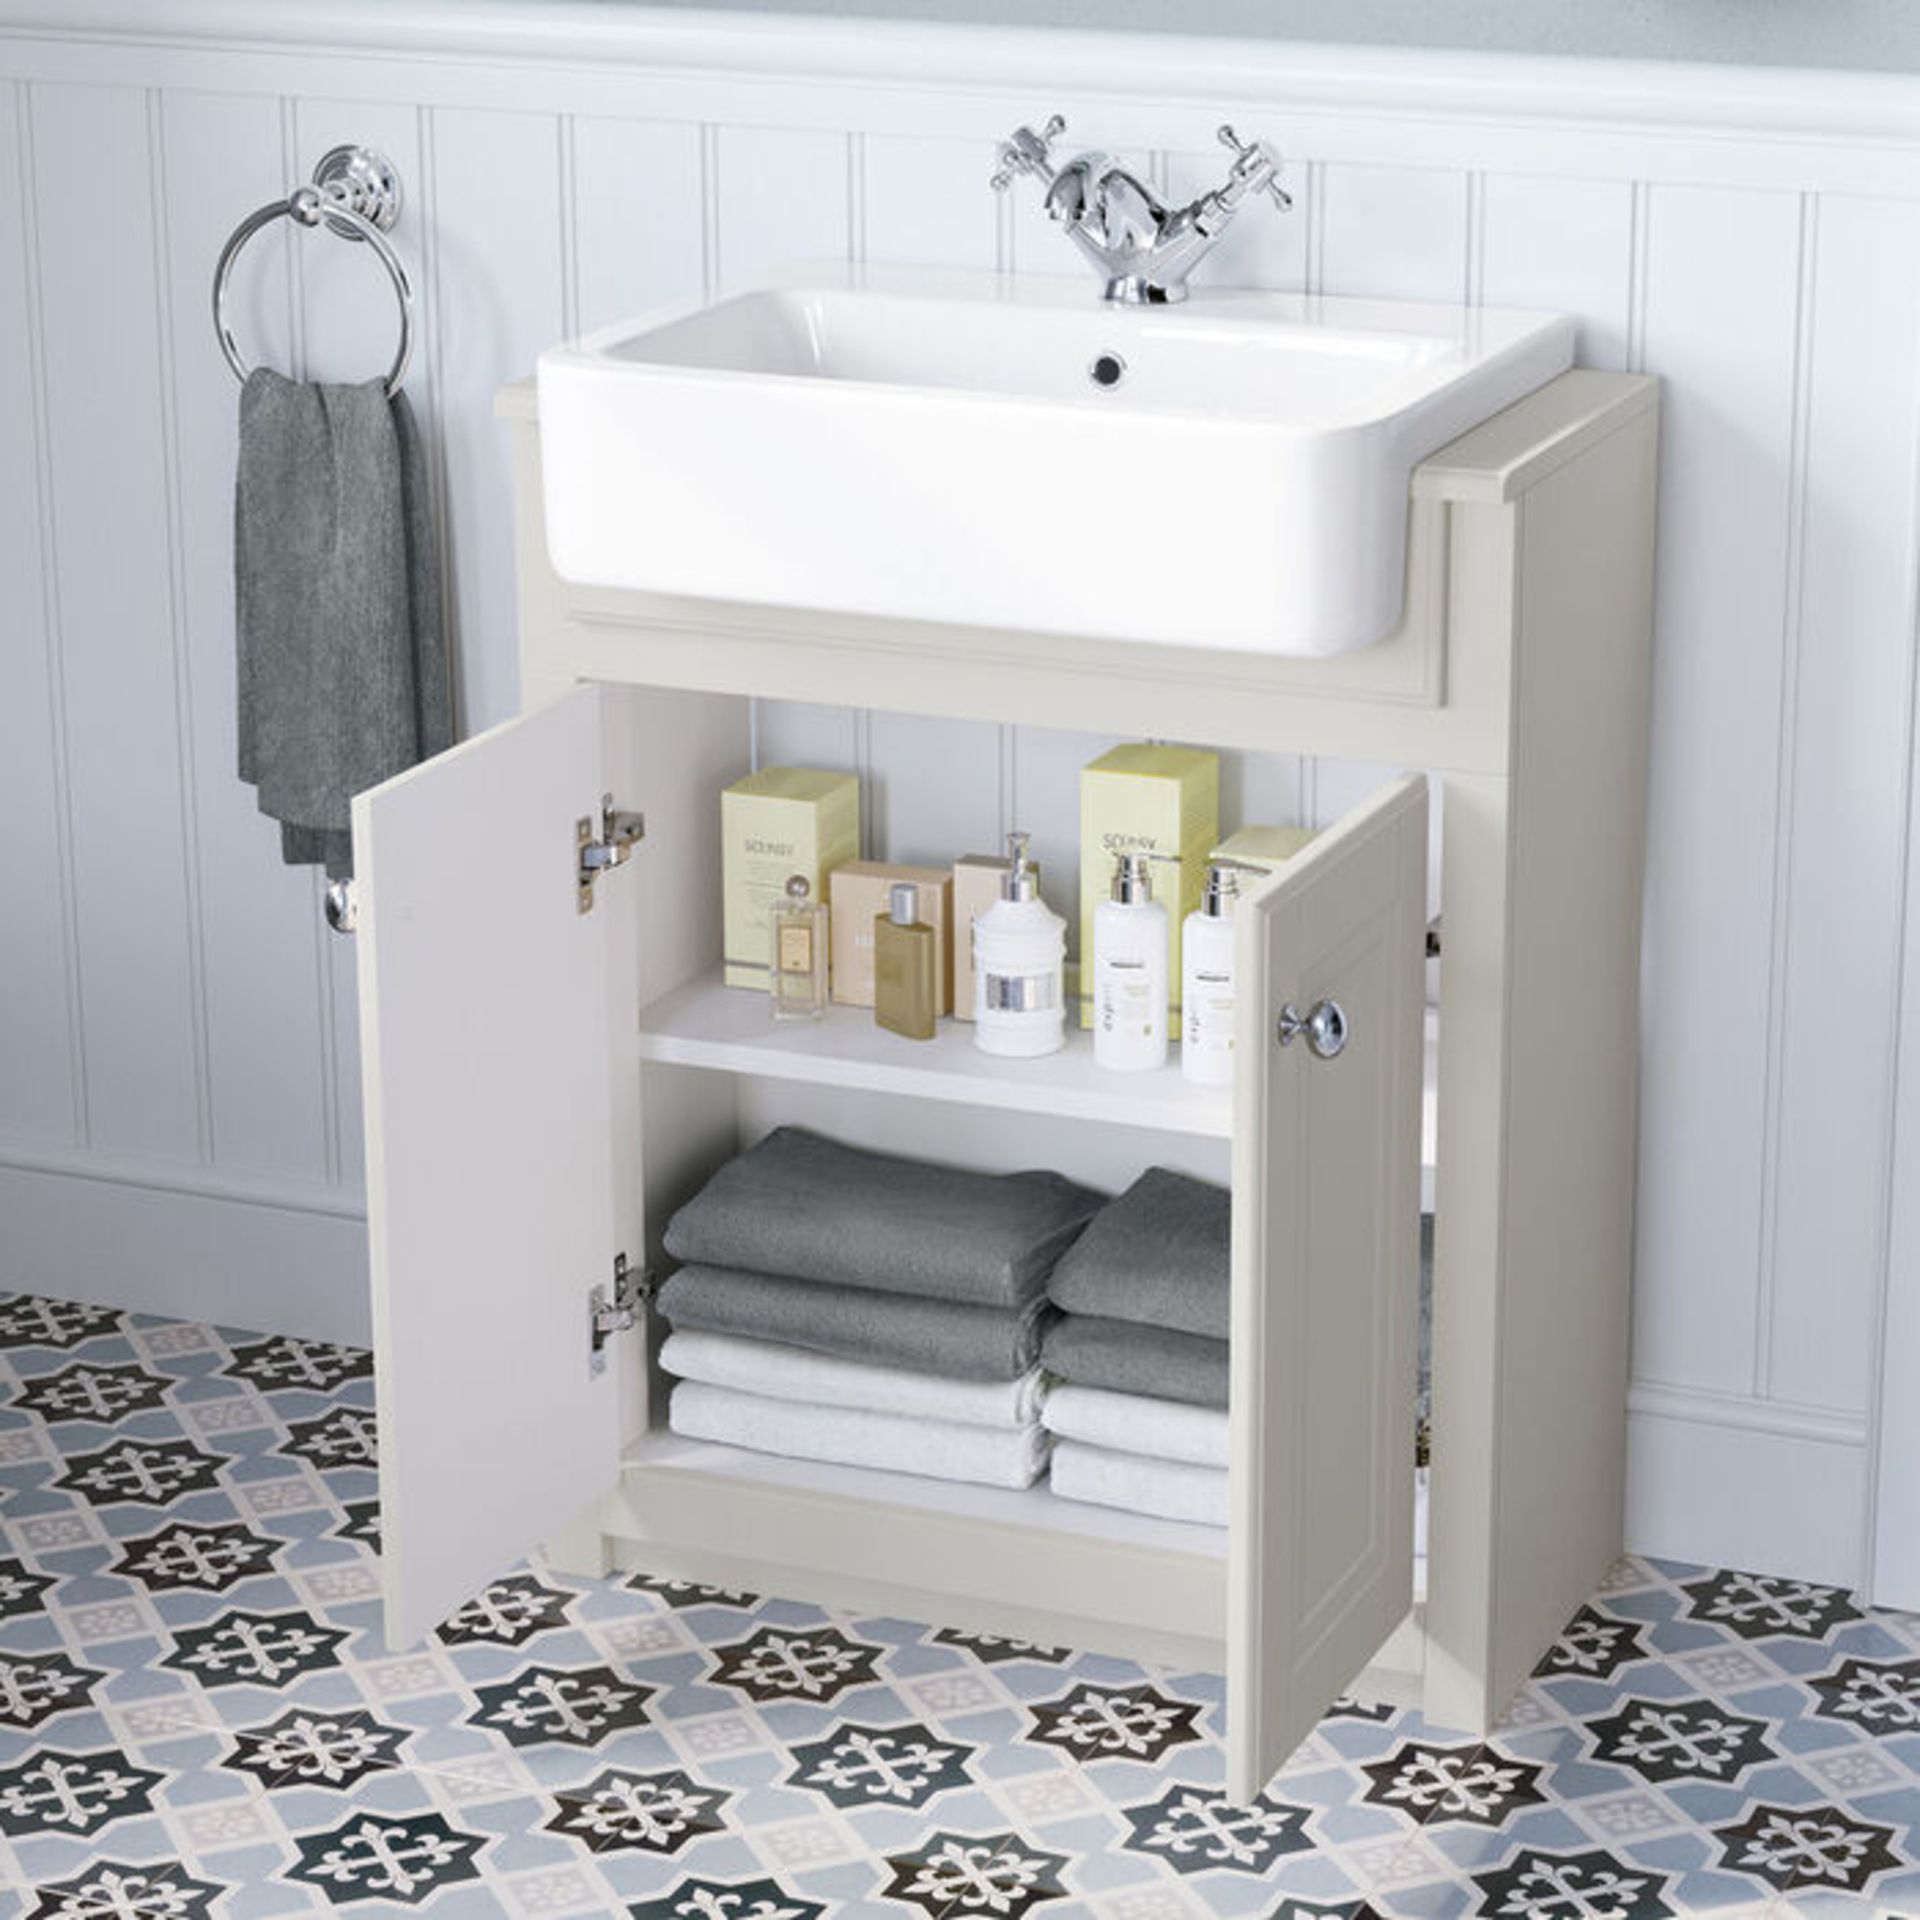 NEW & BOXED 667mm Cambridge Clotted Cream FloorStanding Sink Vanity Unit. RRP £749.99.Comes co...